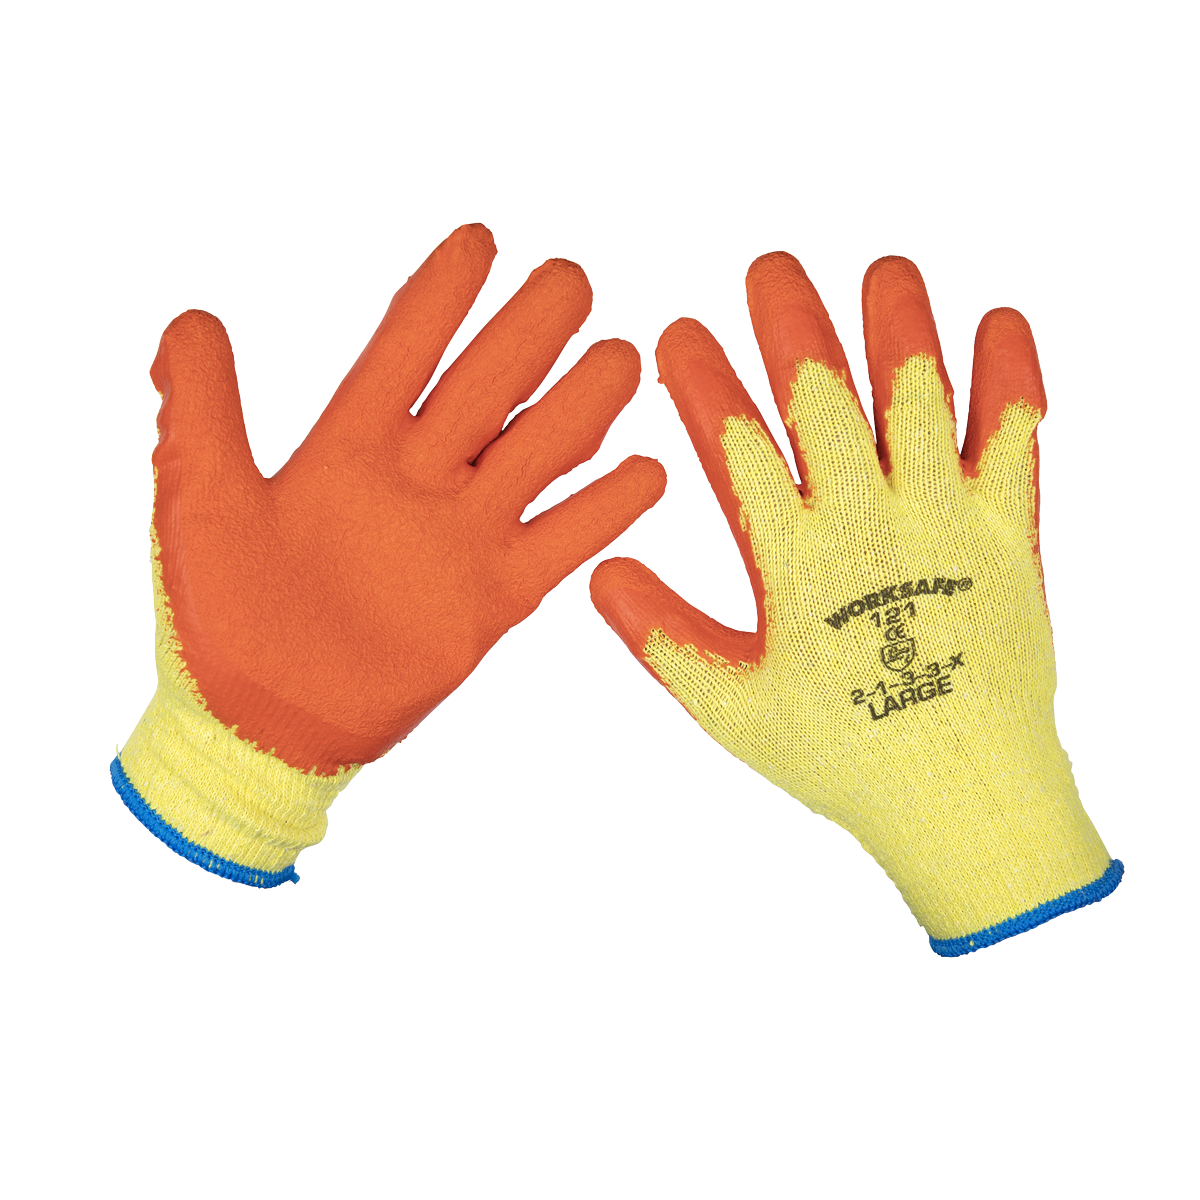 Sealey Super Grip Knitted Gloves Latex Palm (Large) - Pair 9121L